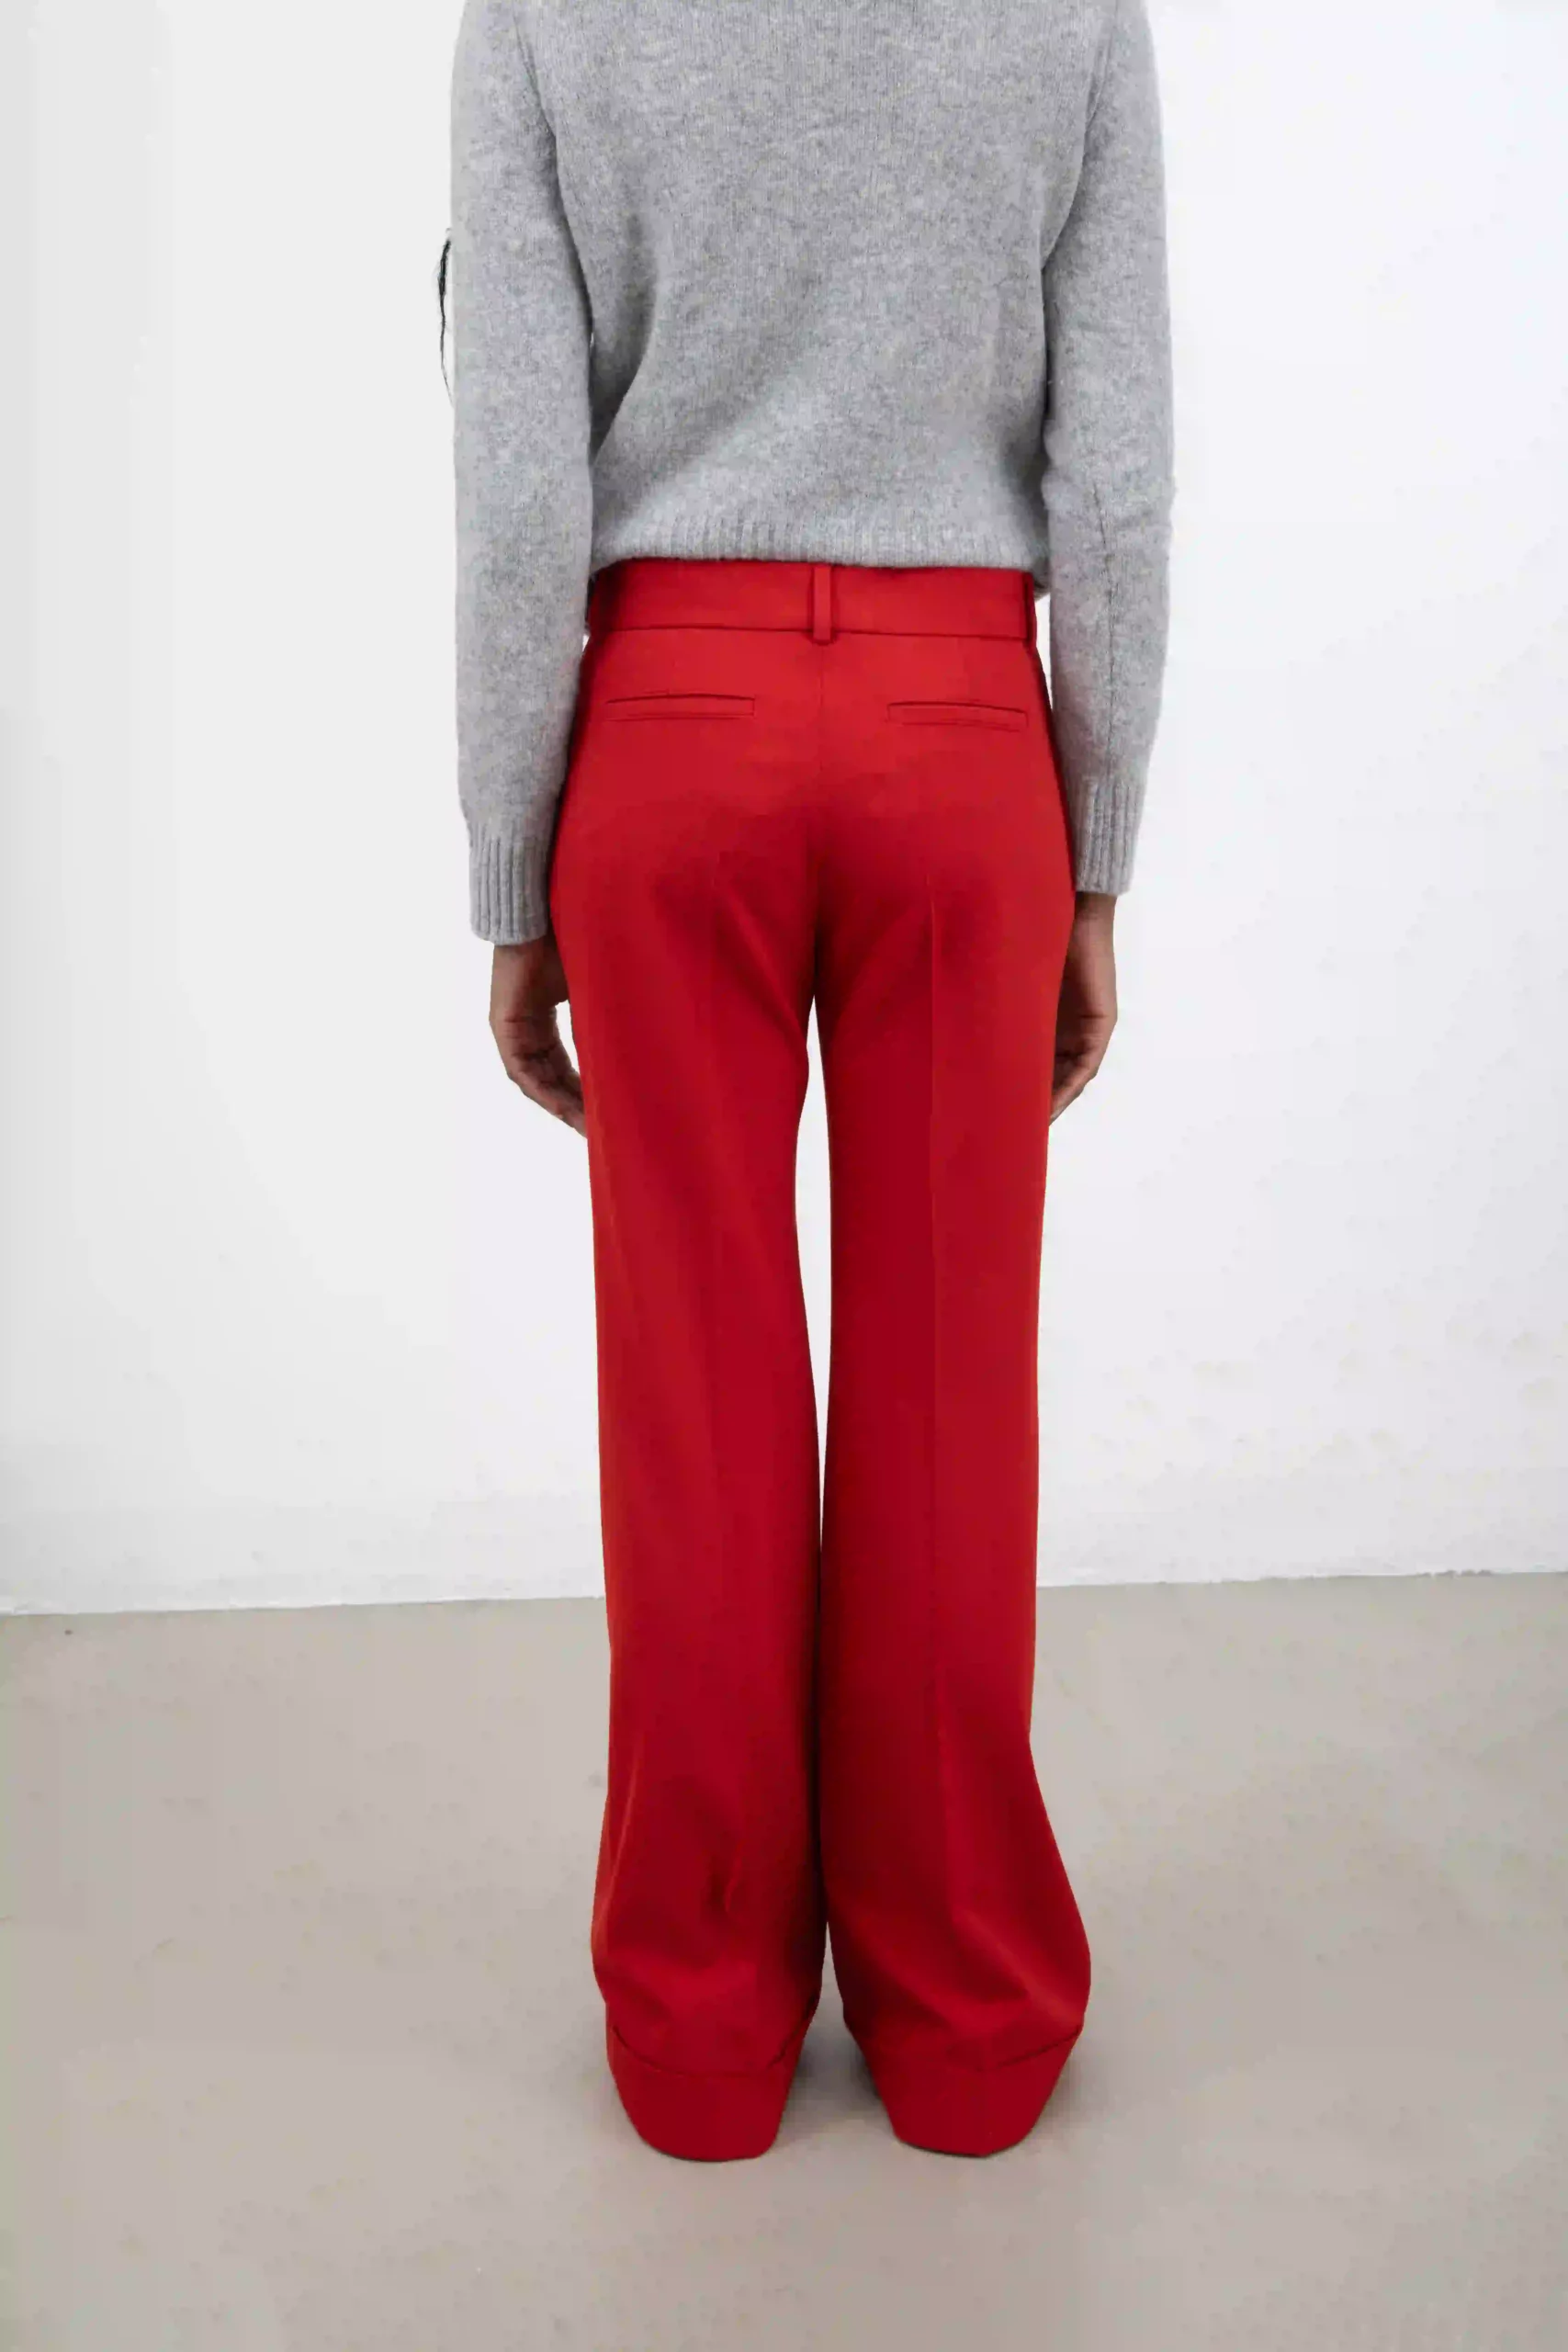 Gorgeous Pompeian red Acne Studios pants, palazzo model. With stitched pleat on the front. Button and zipper closure. Welt pockets on the back.